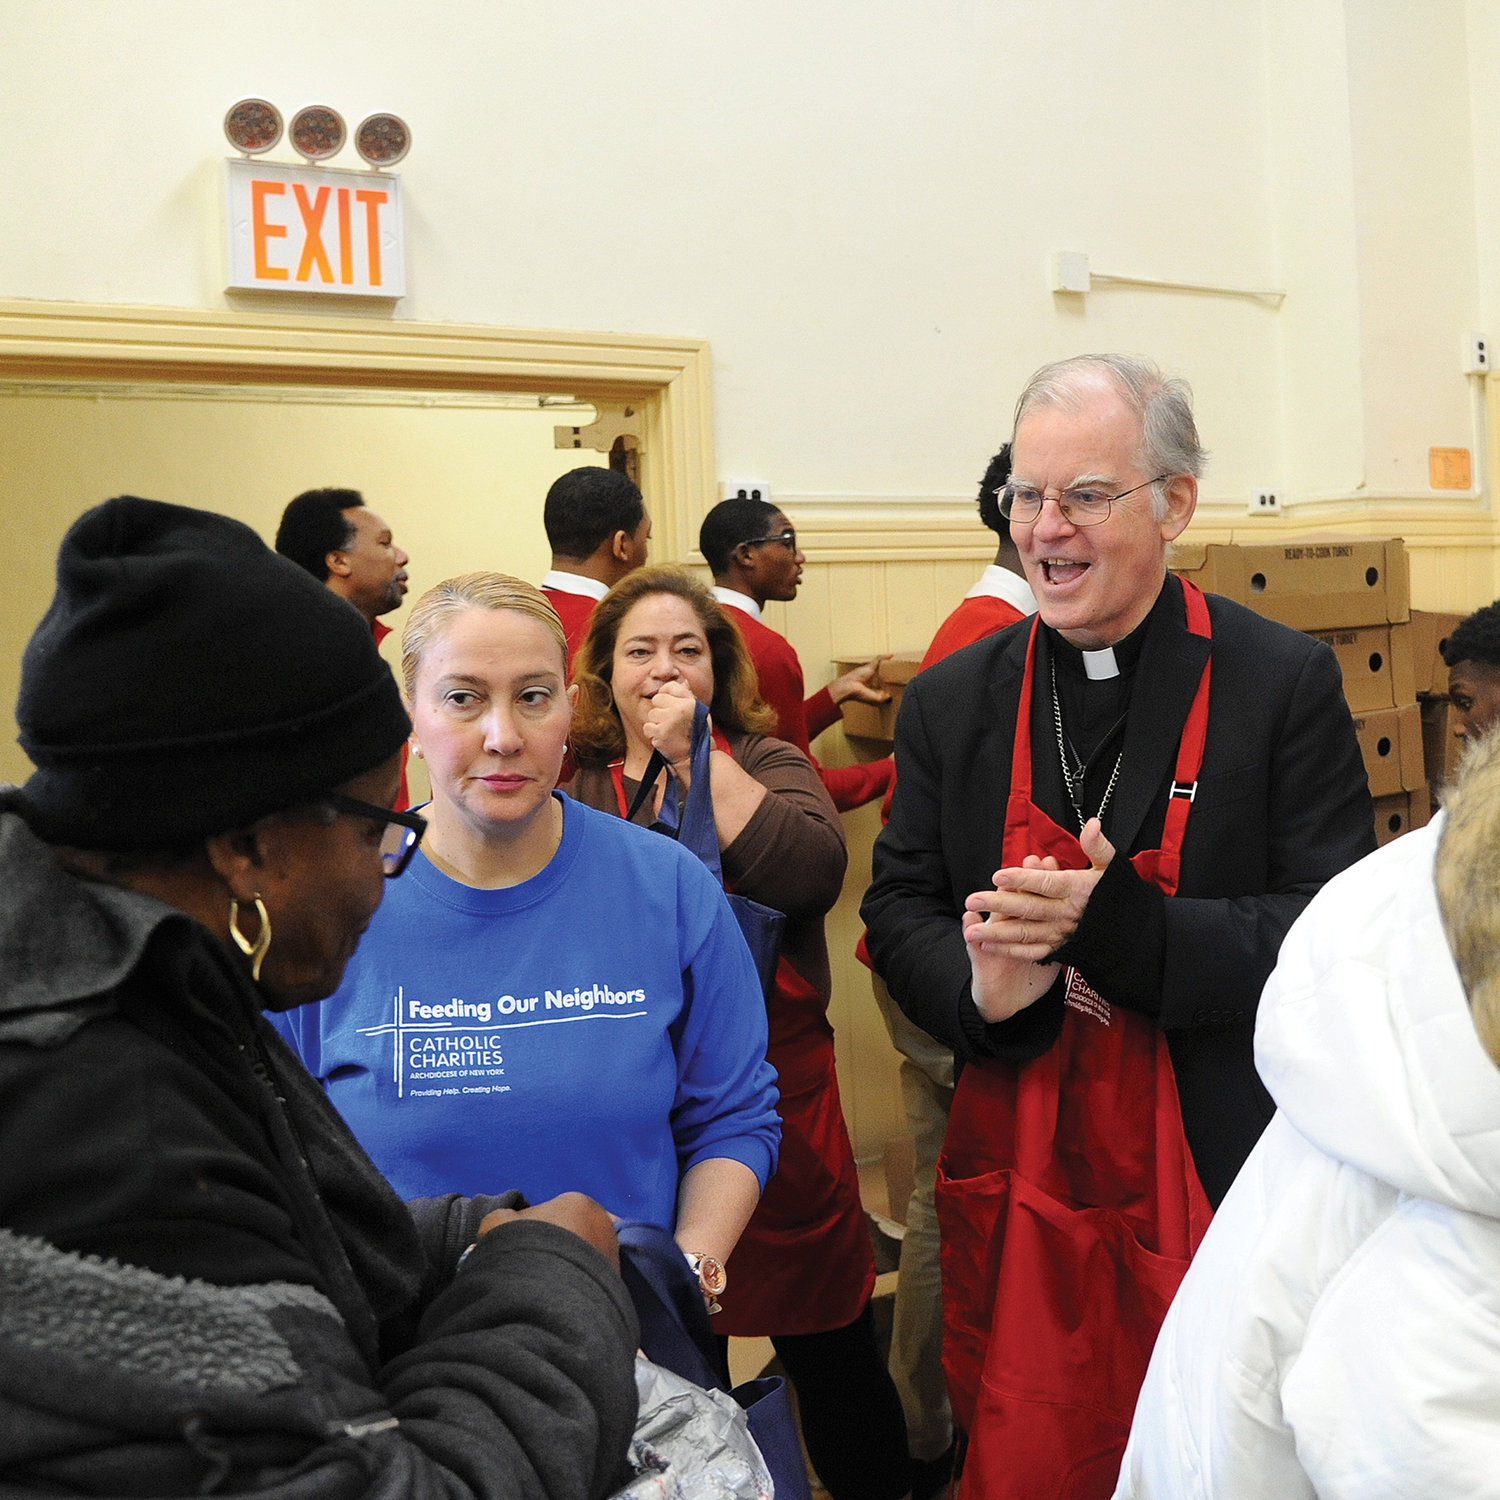 Auxiliary Bishop Peter Byrne led the distribution of 800 Thanksgiving turkeys to families in need two days before Thanksgiving Nov. 26 at the Lt. Joseph P. Kennedy Community Center in Harlem. (The bishop was substituting for Cardinal Dolan, who was offering a Funeral Mass for Alfred E. Smith IV at St. Patrick’s Cathedral.) Yams, potatoes and apples completed the full menu given out at the annual turkey distribution by Catholic Charities of New York.